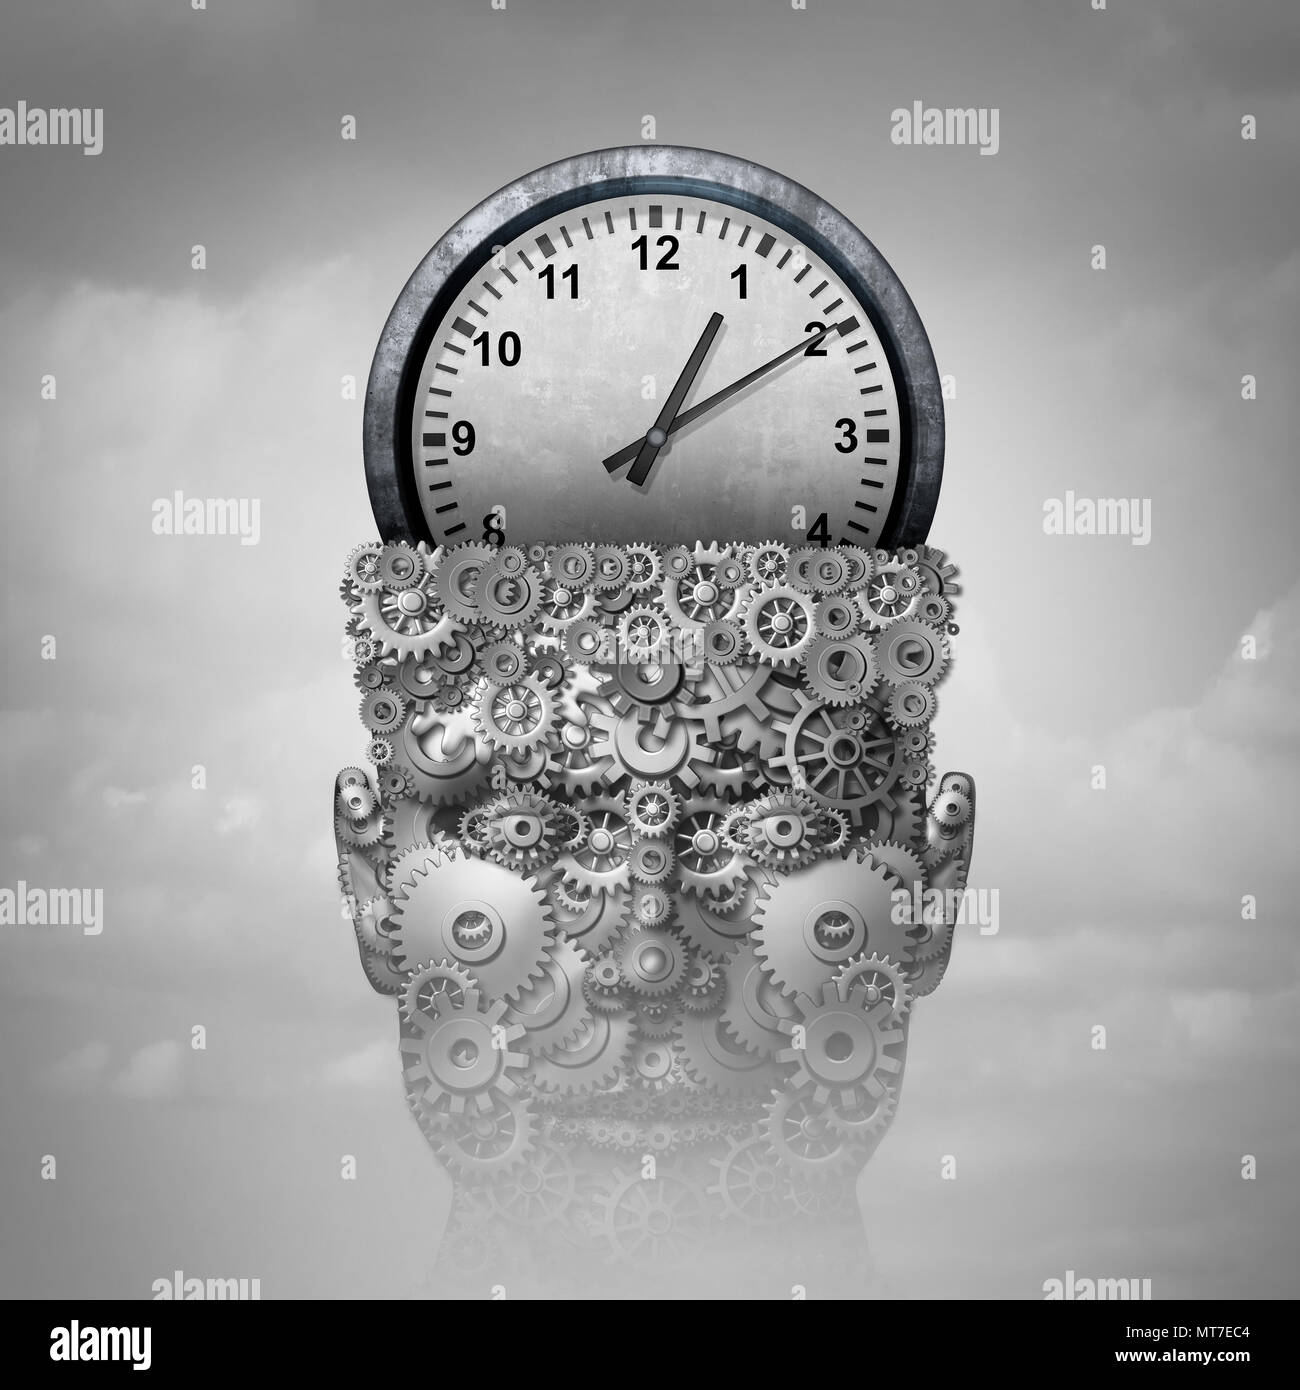 Time intelligence as a business marketing planning concept idea and corporate training education symbol as a clock object inside a human gear . Stock Photo